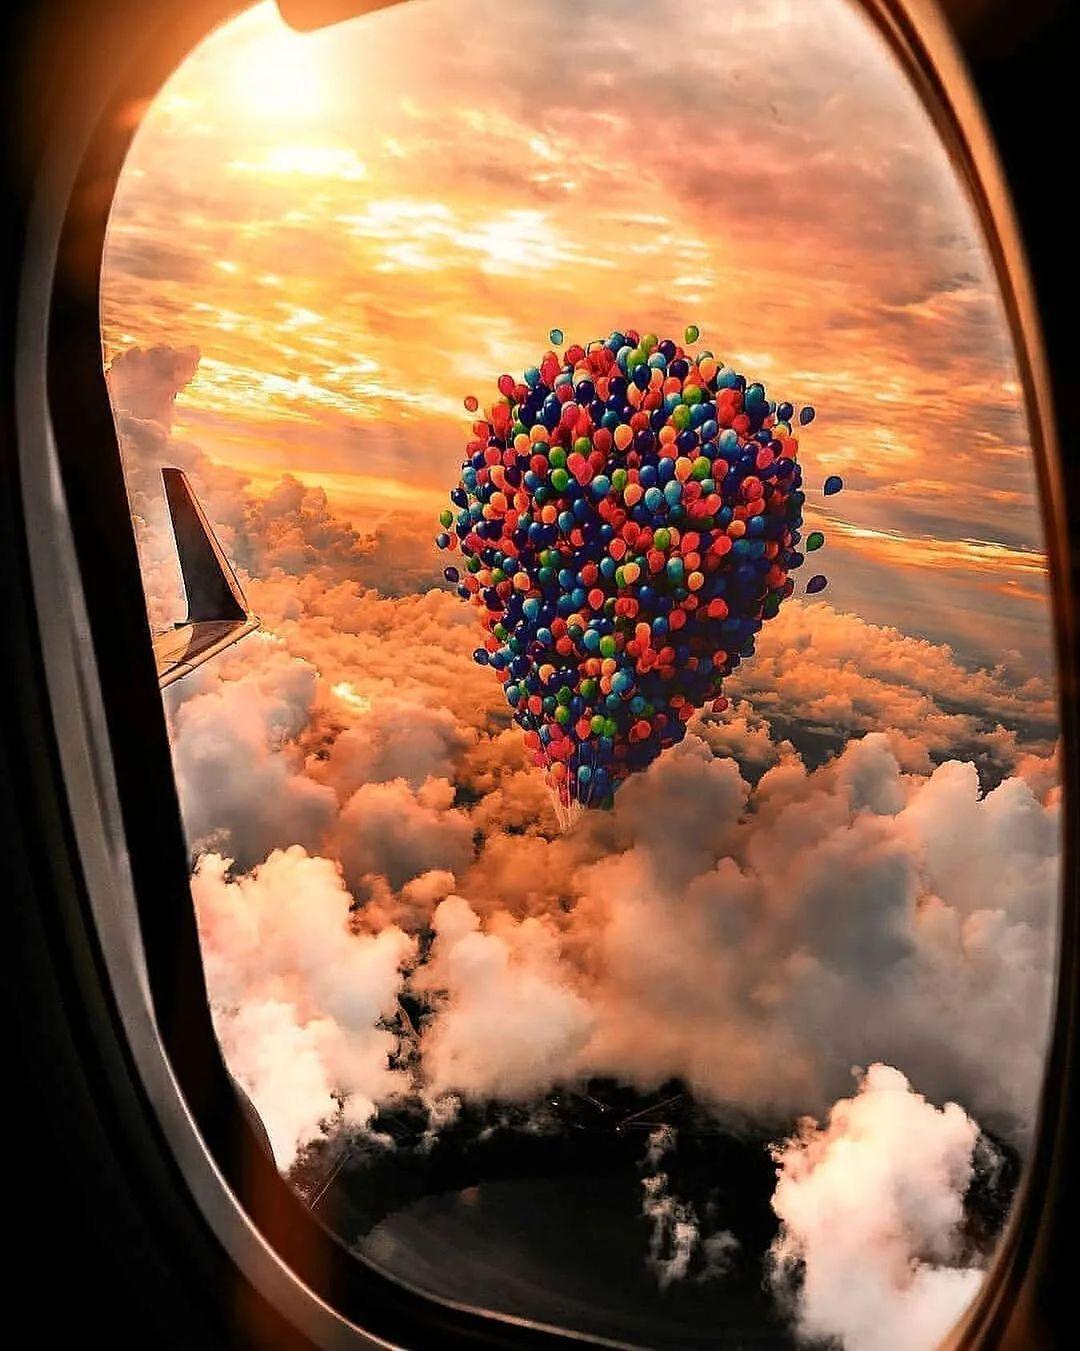 class="content__text"
 When the movie "Up" turns into reality! 🎈⛅ Have you seen the movie? @TheOurSpace 🌌 🔭

Do you love this Photo? ❤

Are you ready to explore Deep Space 🔭 @TheOurDeepSpace 

Image credit: @kevinlauwren